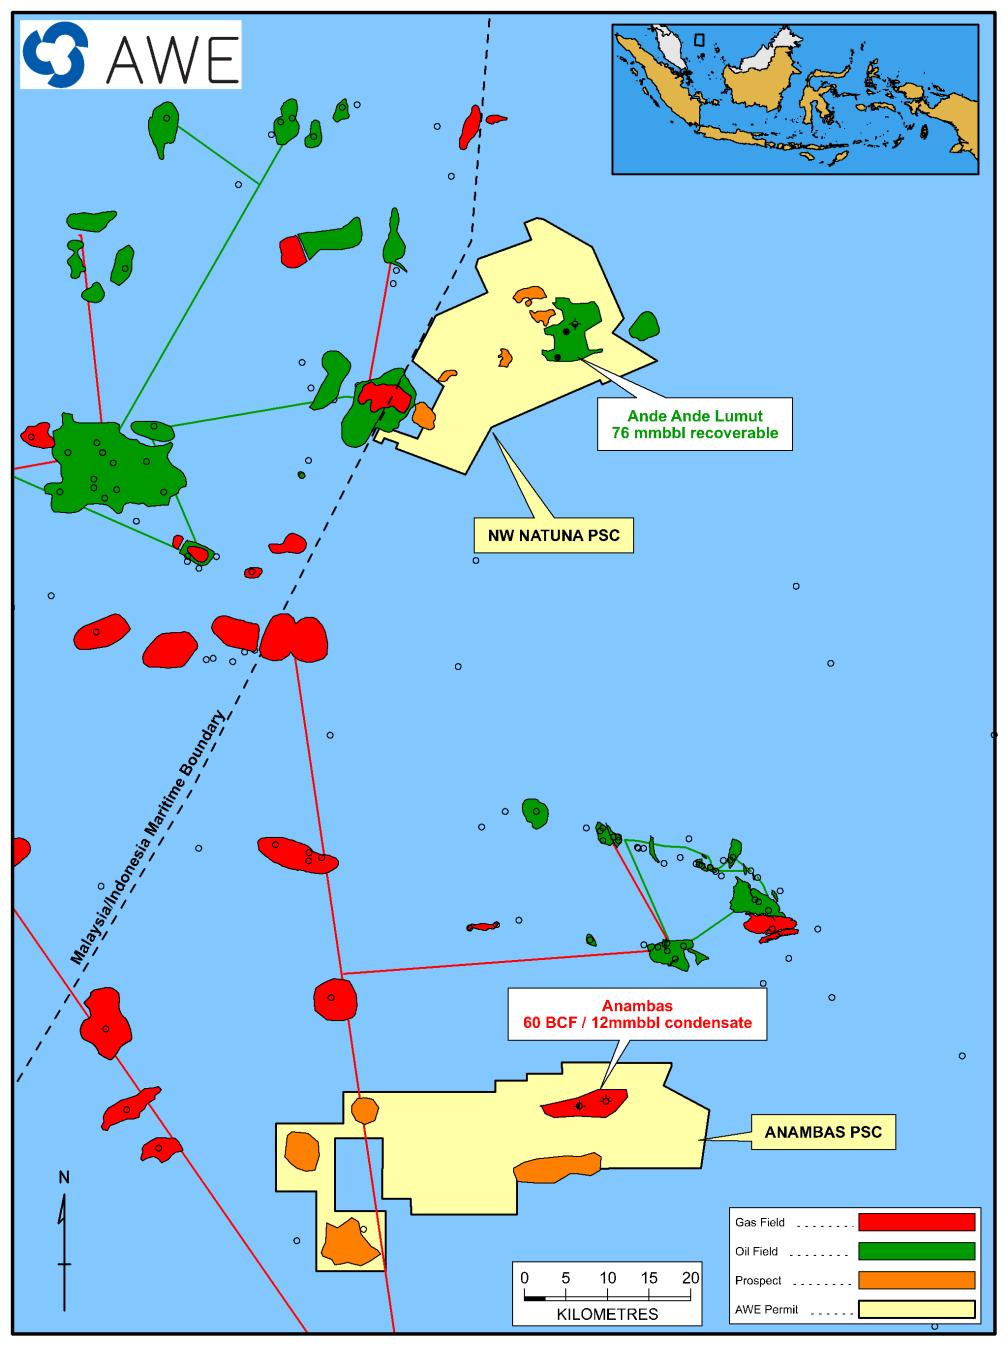 Anambas gas discovery (AWE 100%) Anambas PSC acquired as part of the AAL purchase from Genting Located in Natuna Sea, Indonesia, close to existing gas infrastructure Anambas discovery estimated to